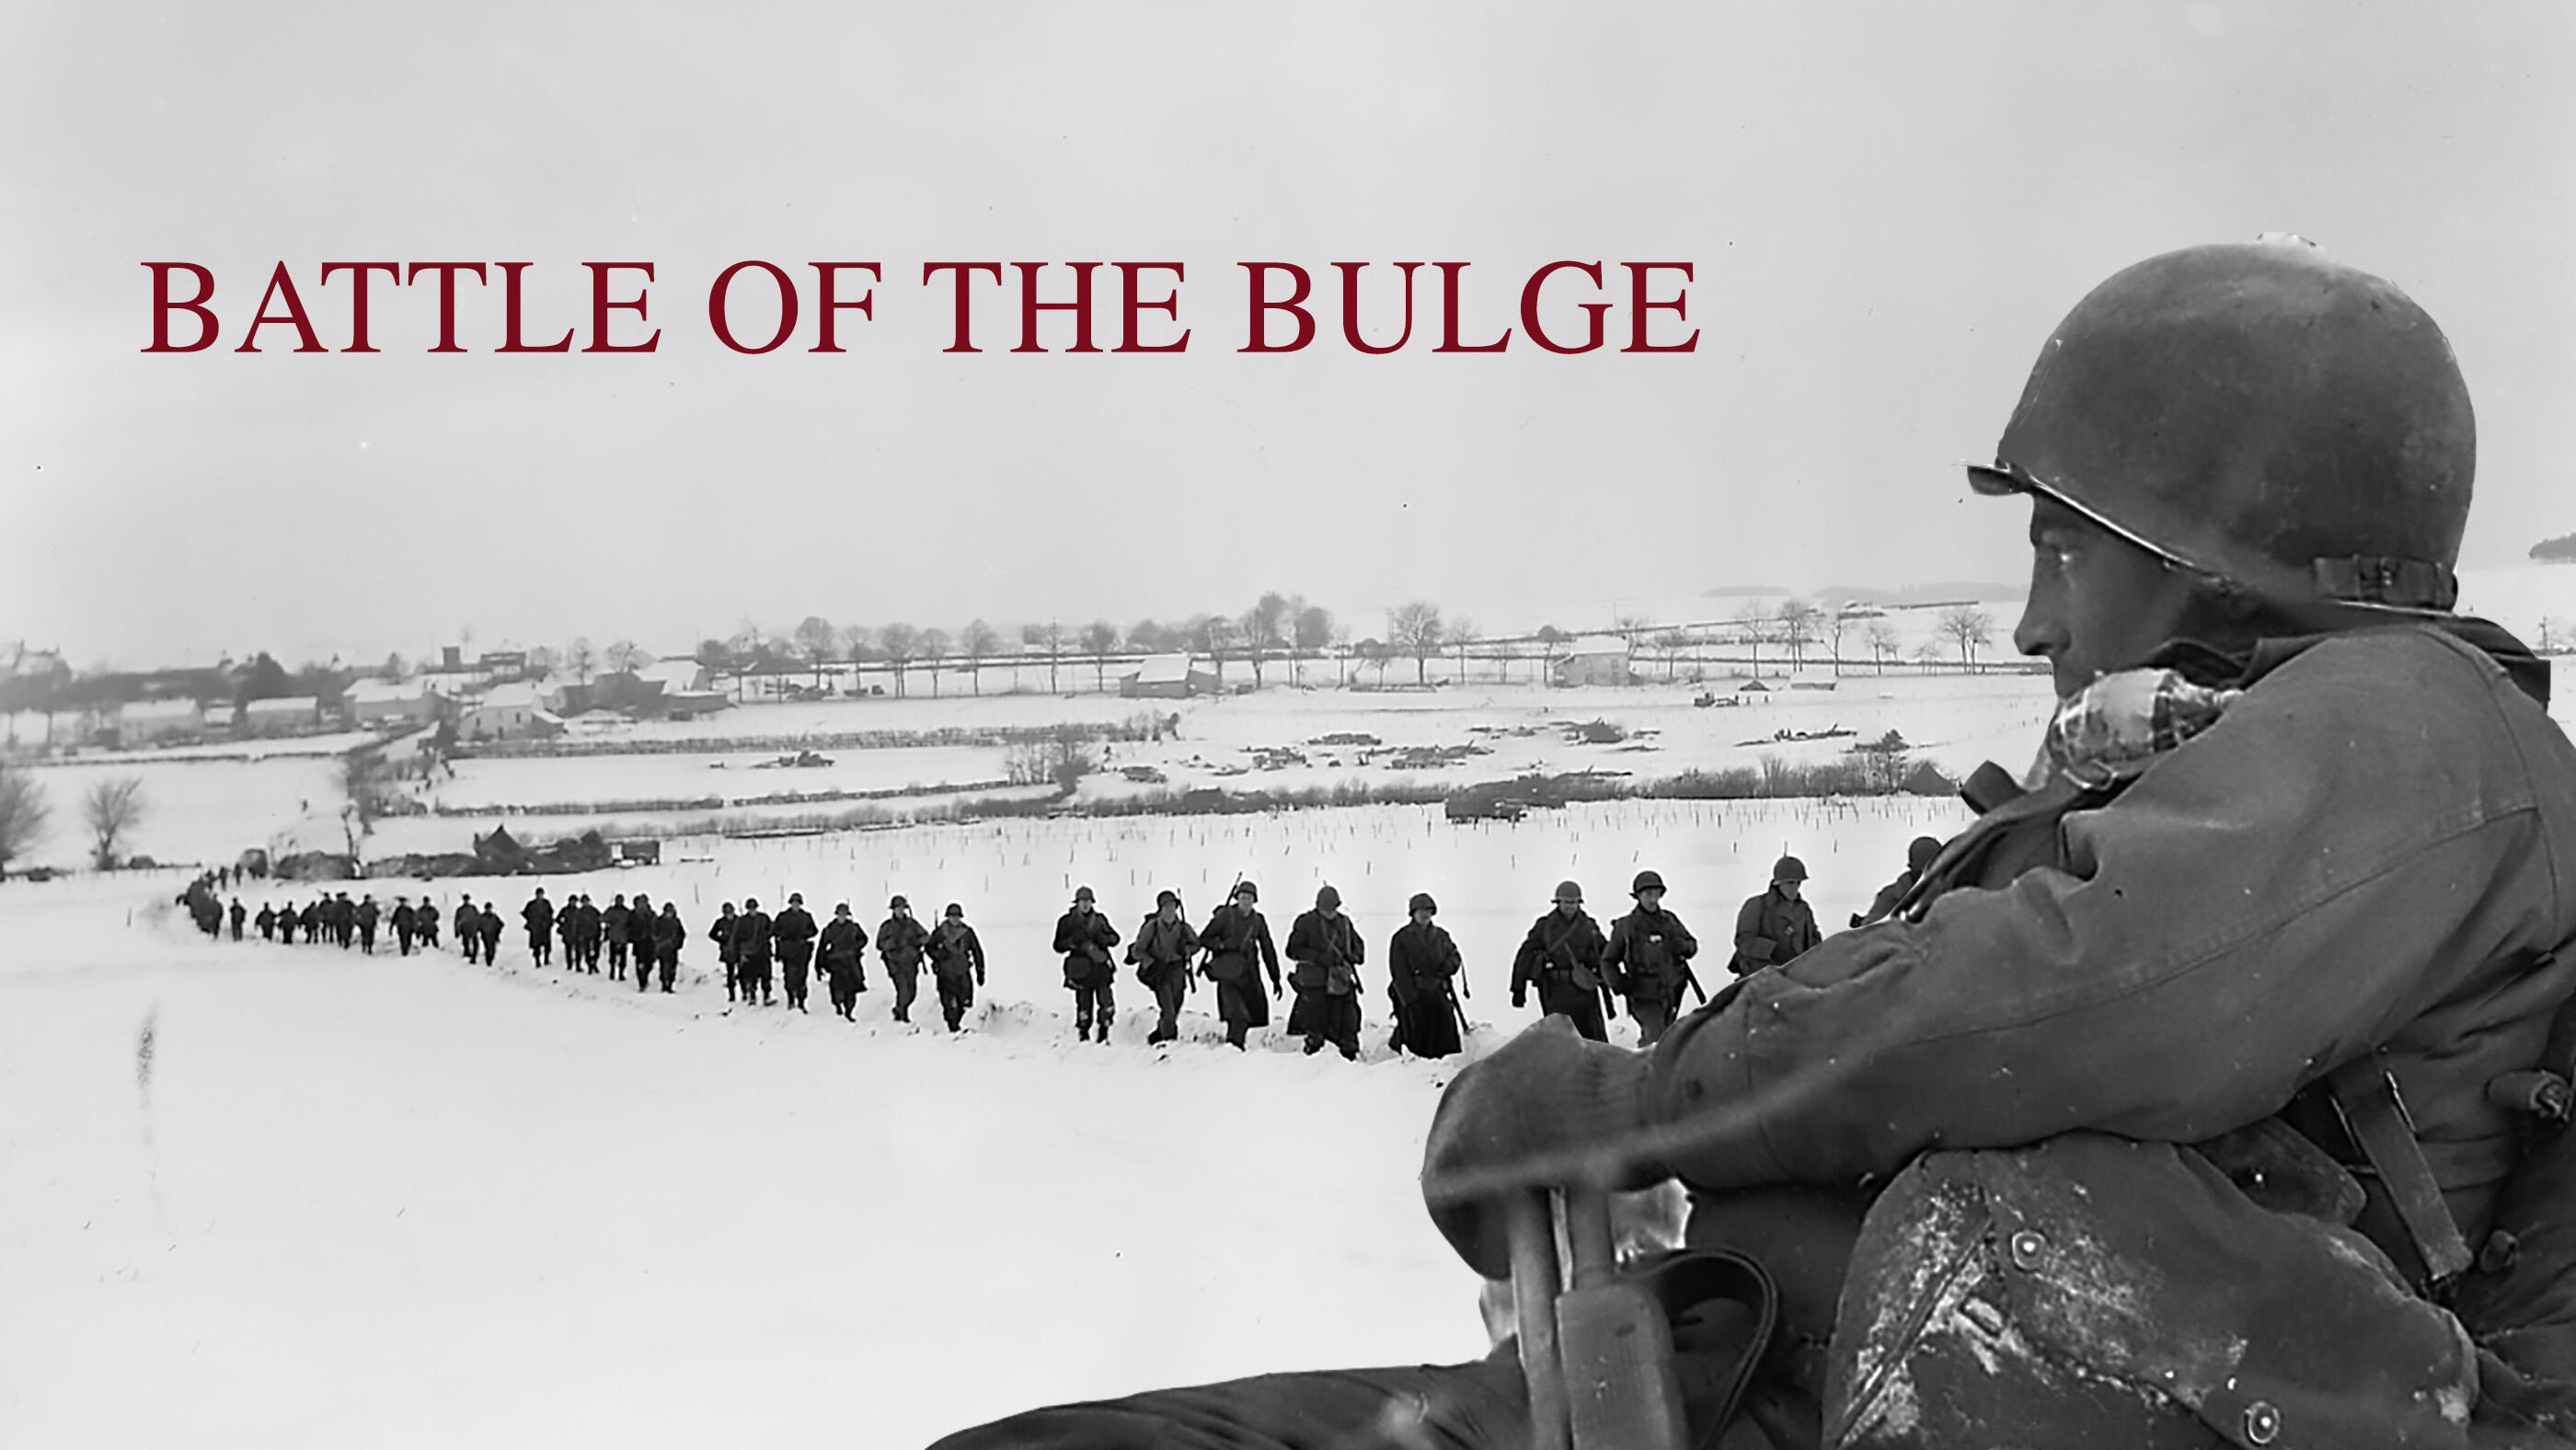 43-facts-about-the-movie-battle-of-the-bulge